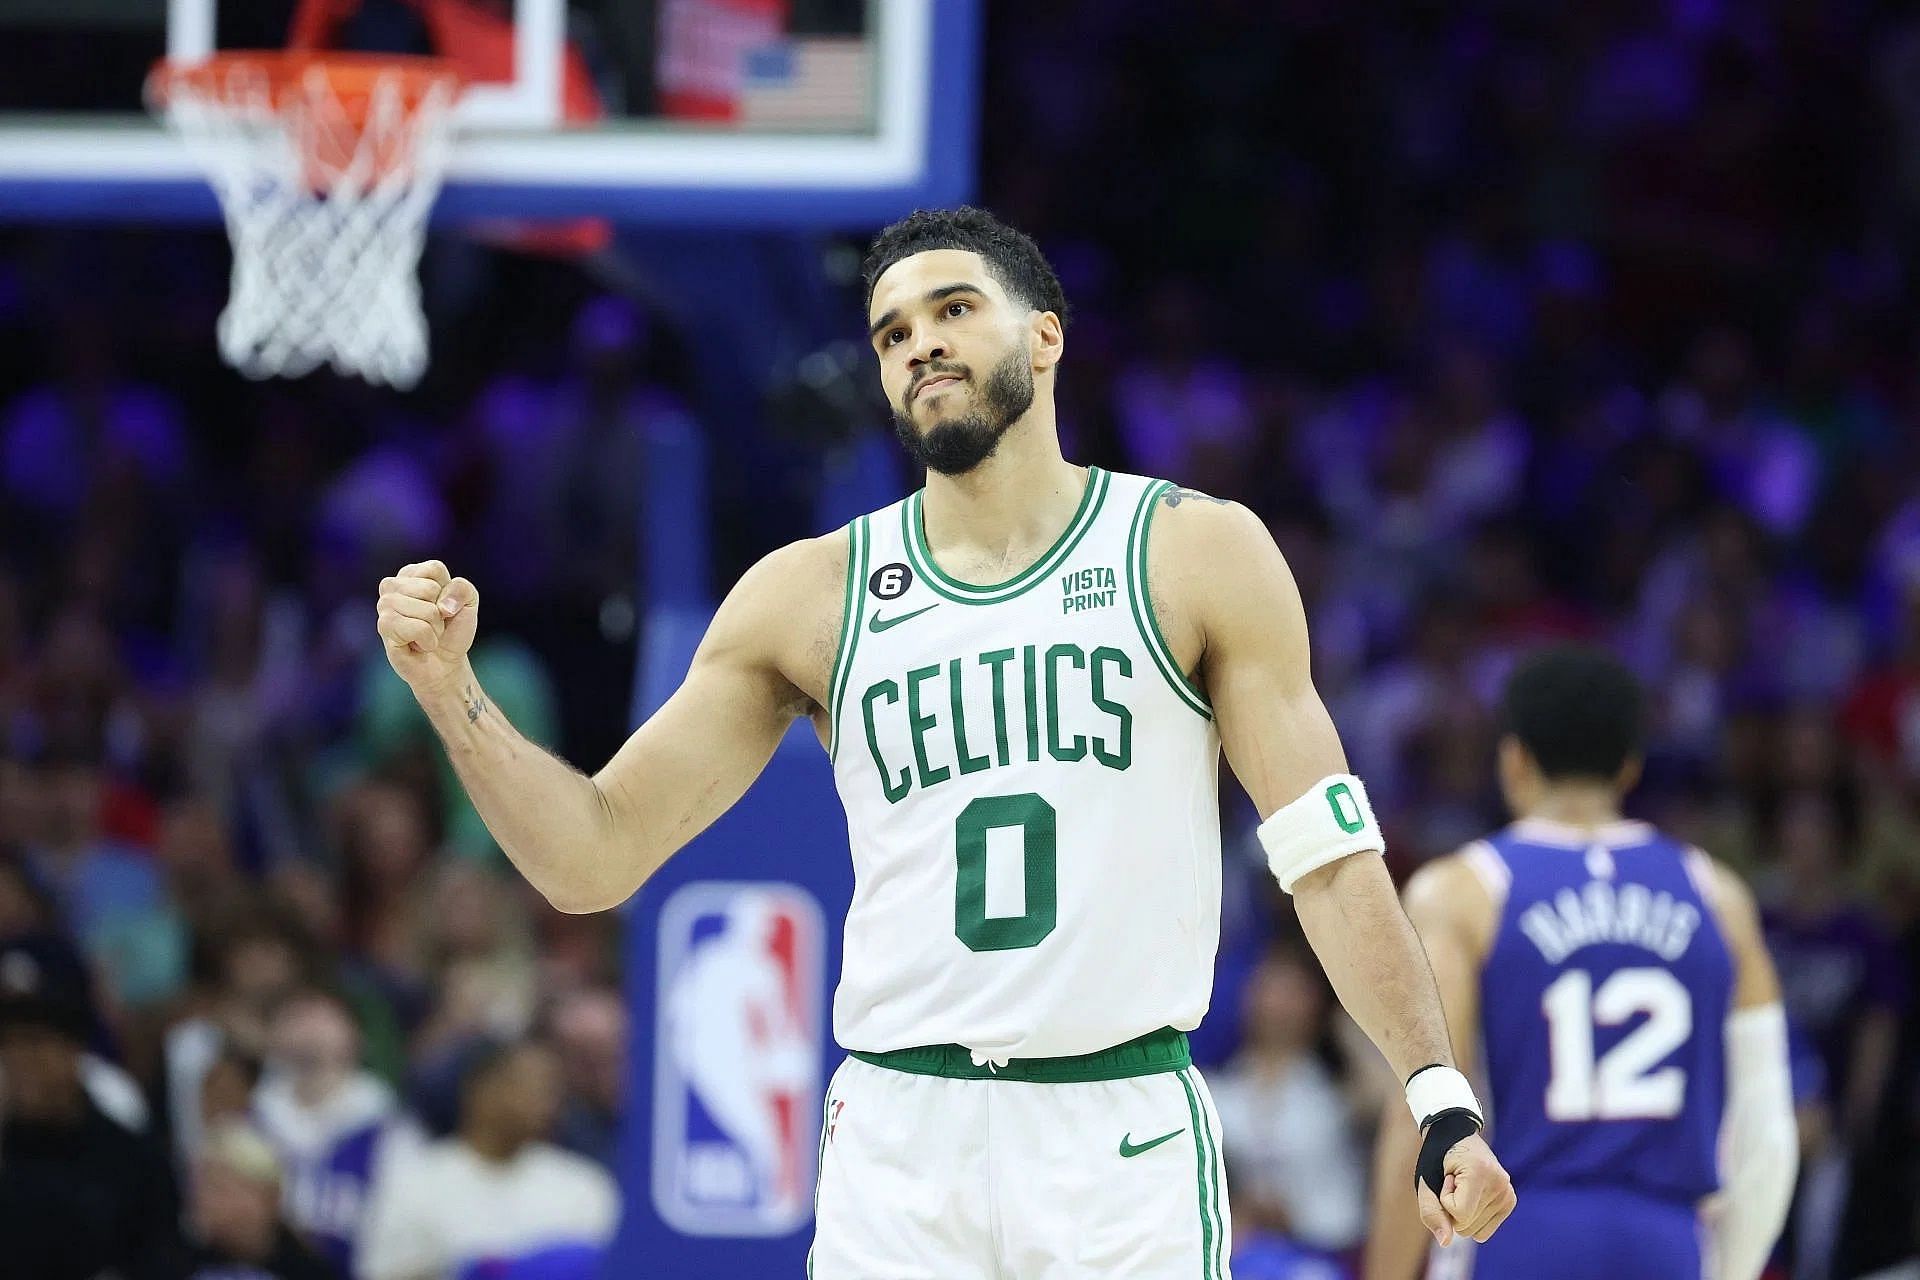 Boston Celtics All-Star Jayson Tatum just laughed it off after he was ejected in their game against the Philadelphia 76ers on Friday.